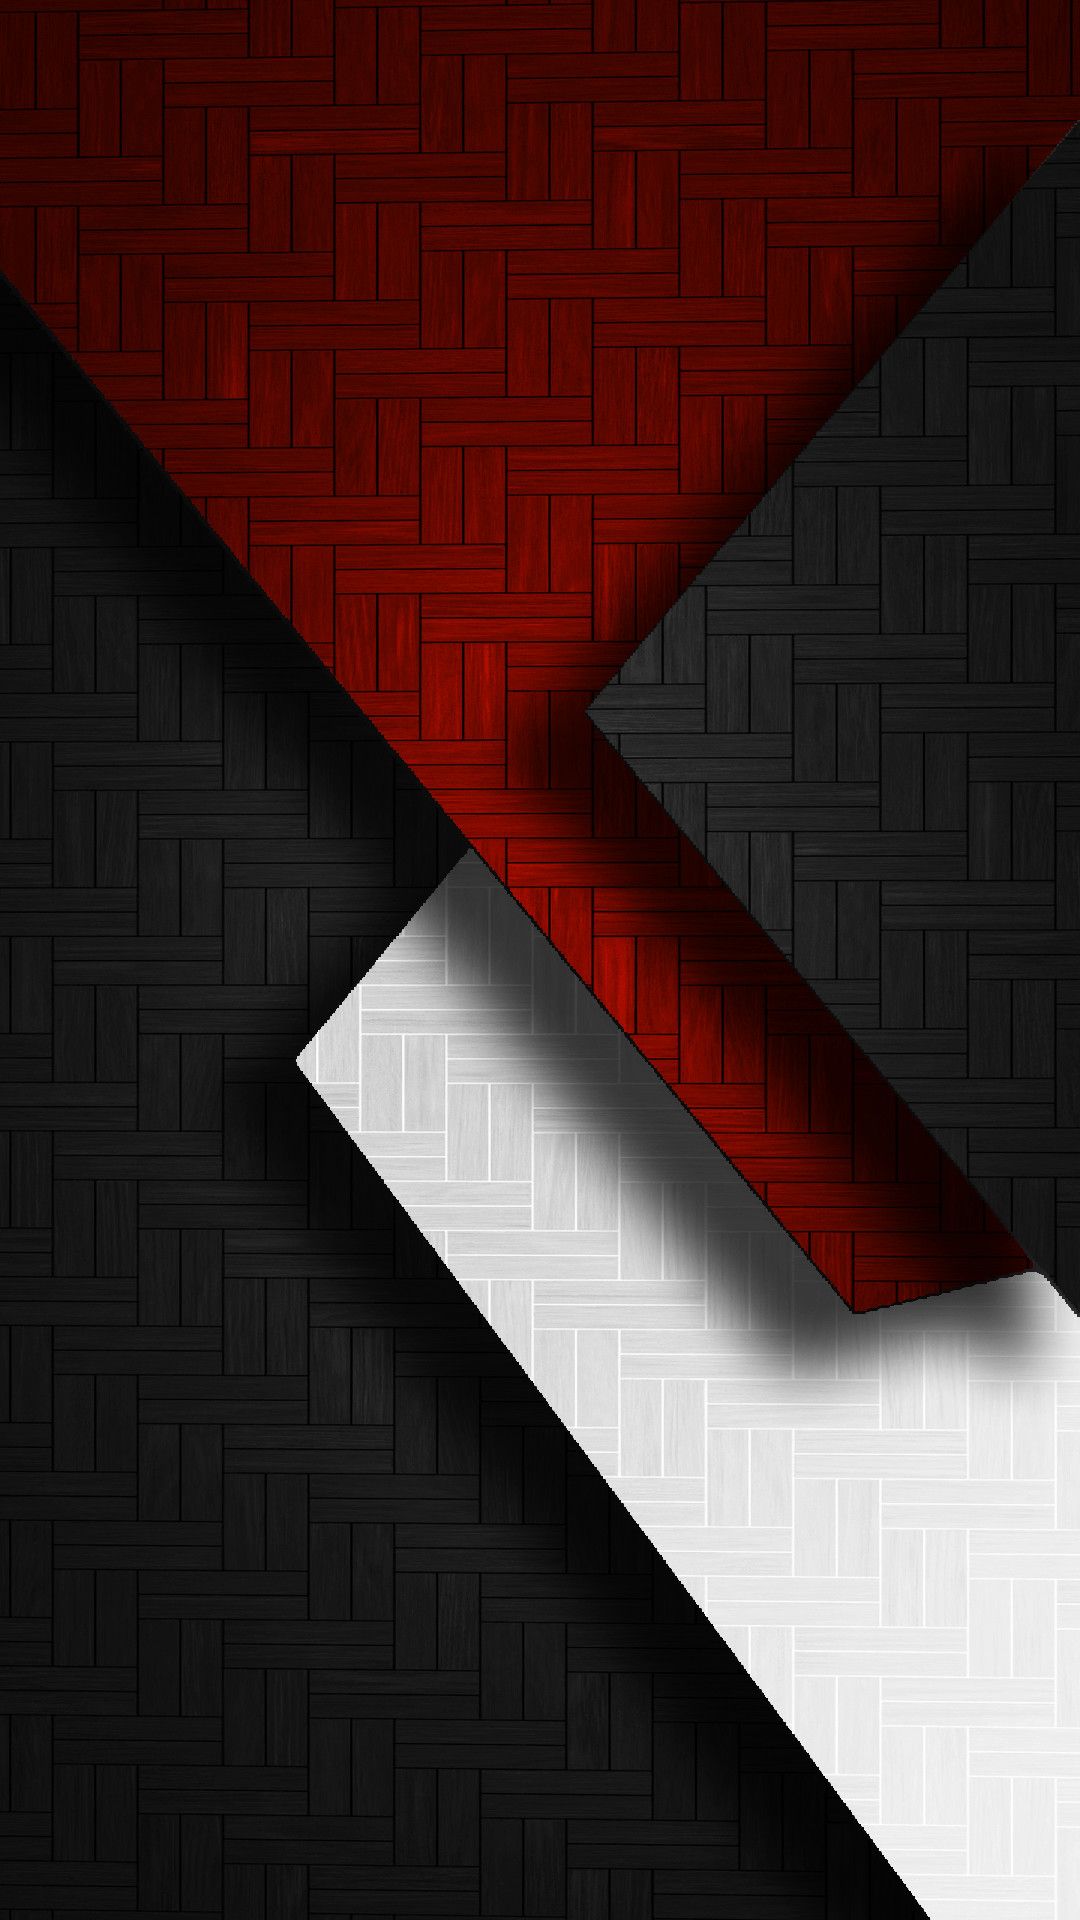 Wallpaper  1080x1920 px Android L material style minimalism 1080x1920   wallup  1235219  HD Wallpapers  WallHere